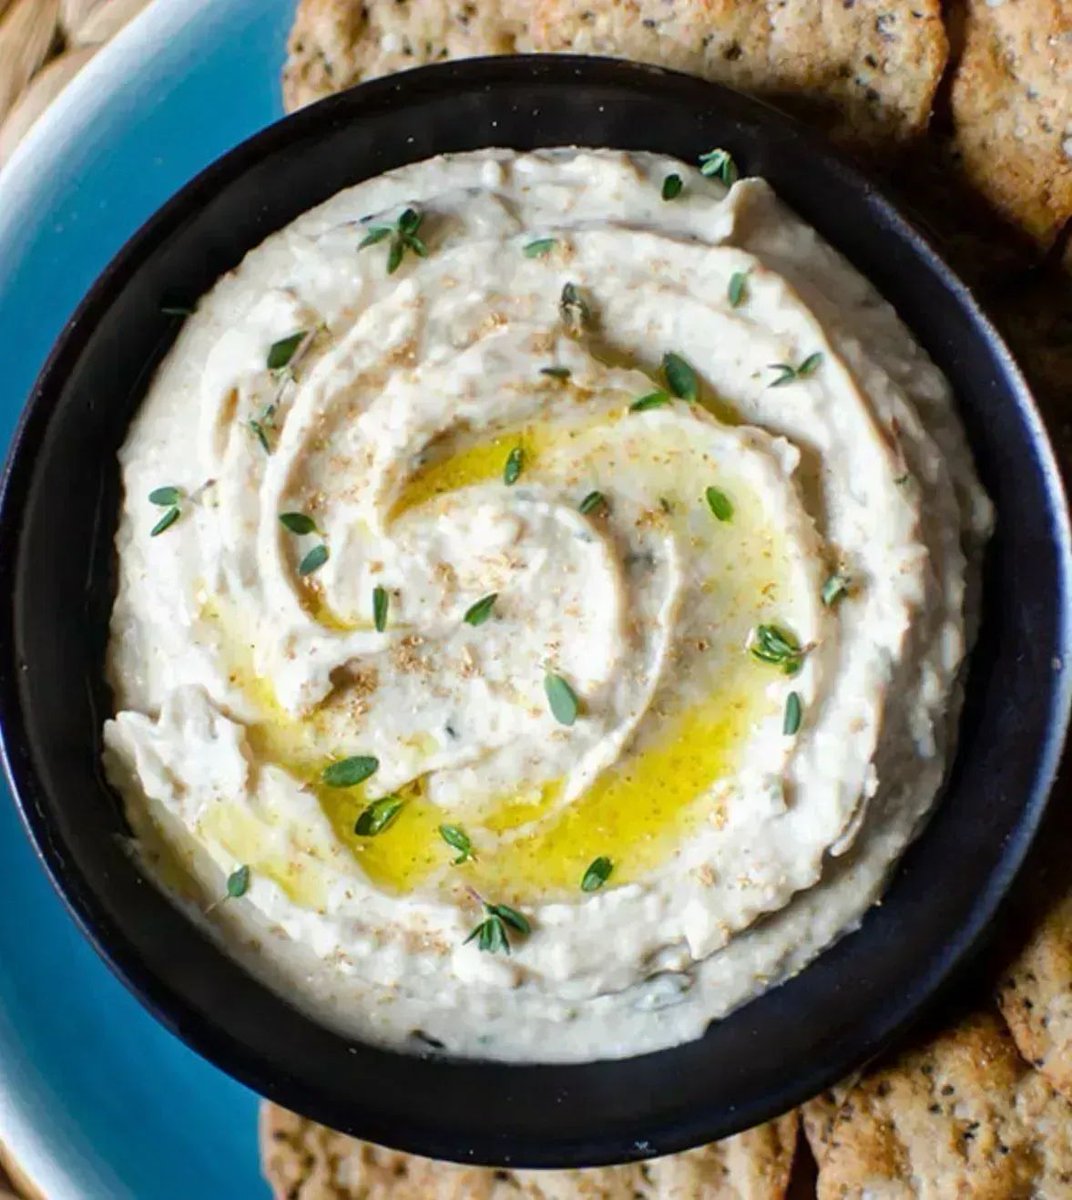 INCREDIBLY TASTY dip -  my friends LOVE this Living Lou recipe made for @OntarioBeans!

Recipe calls for white kidney beans, thyme, coriander, tahini, garlic and lemon juice - ENJOY!

RECIPE: buff.ly/34t6IHs
#ad #betterwithbeans #homemade